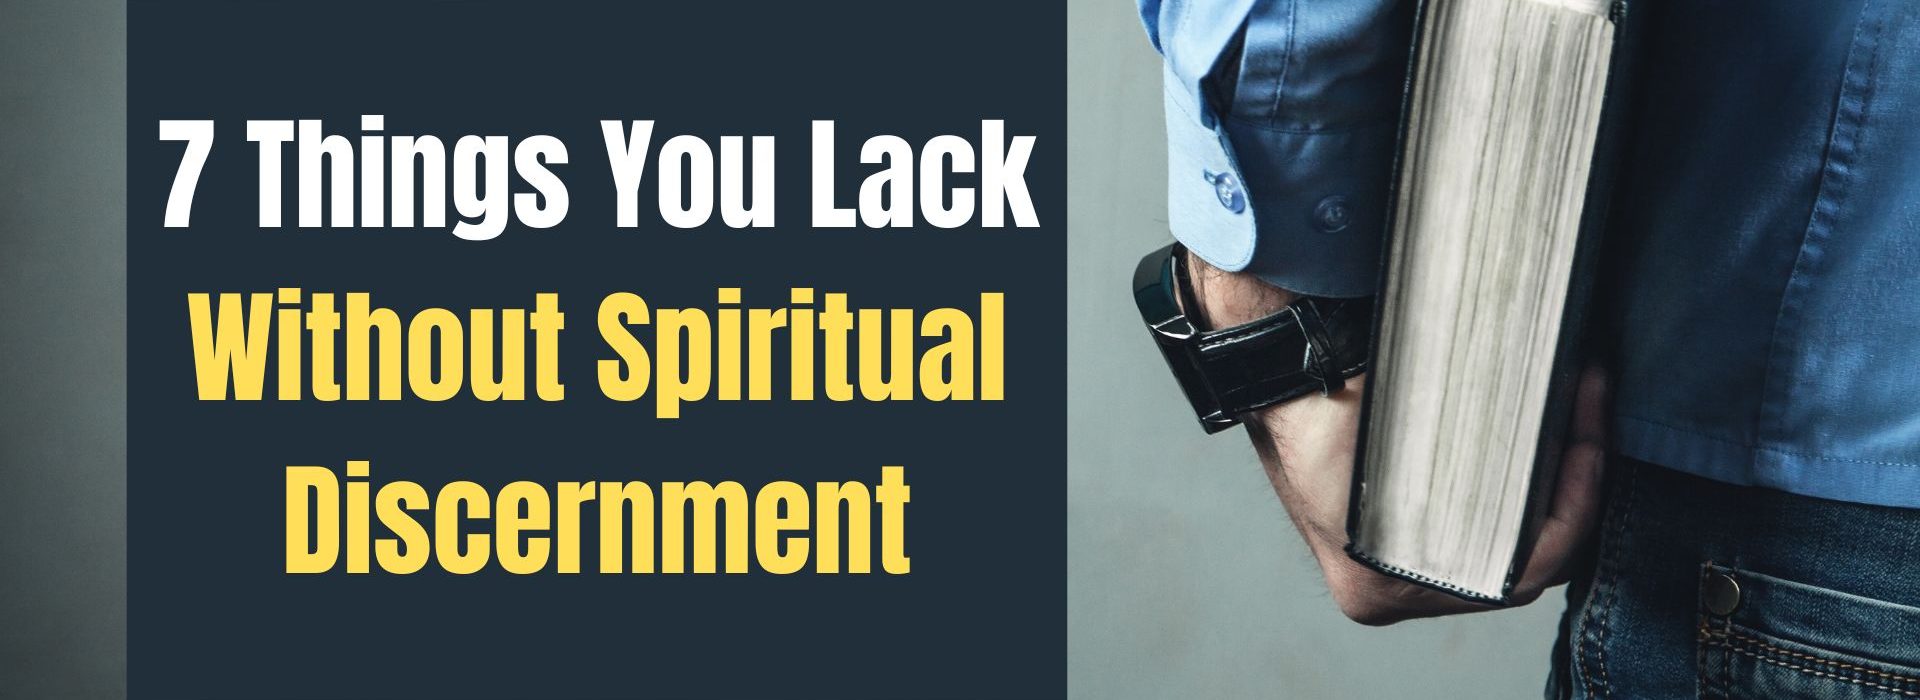 7 Things You Lack Without Spiritual Discernment